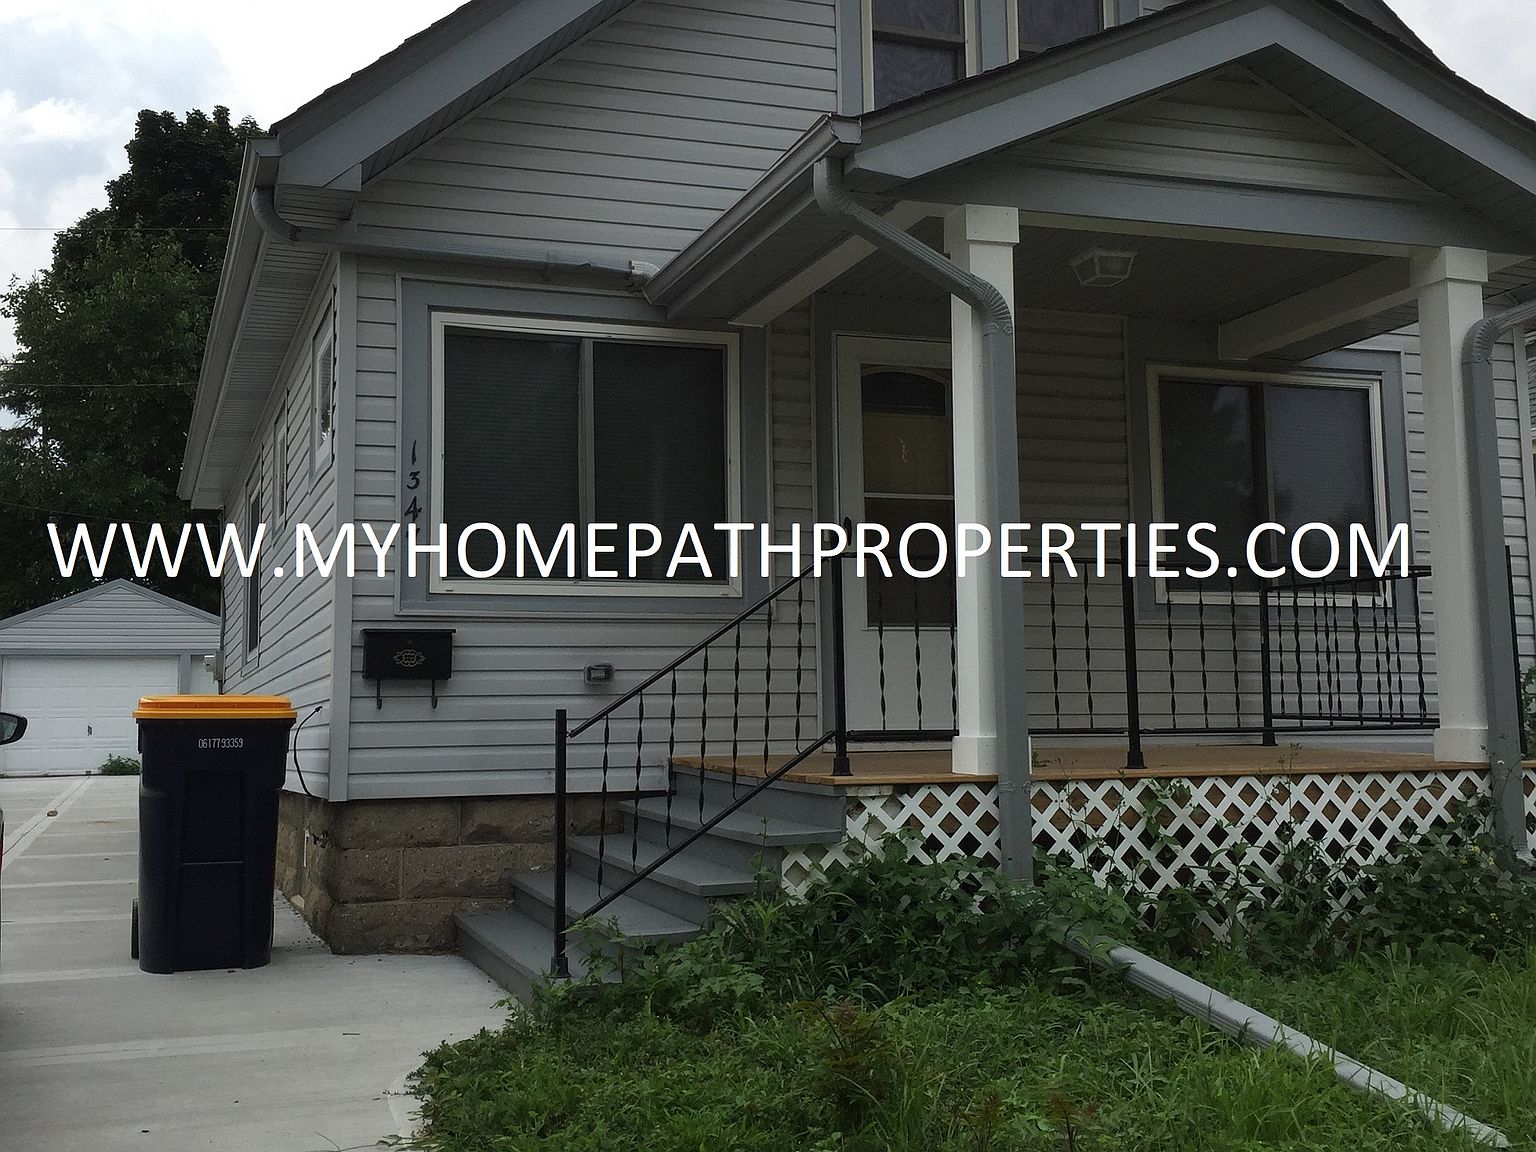 Exteriors Home Innovations Home Repair 7508 W Greenfield Ave West Allis Wi 53214 414 258 7777 Homerepair Roofing House Exterior West Allis Home Repair